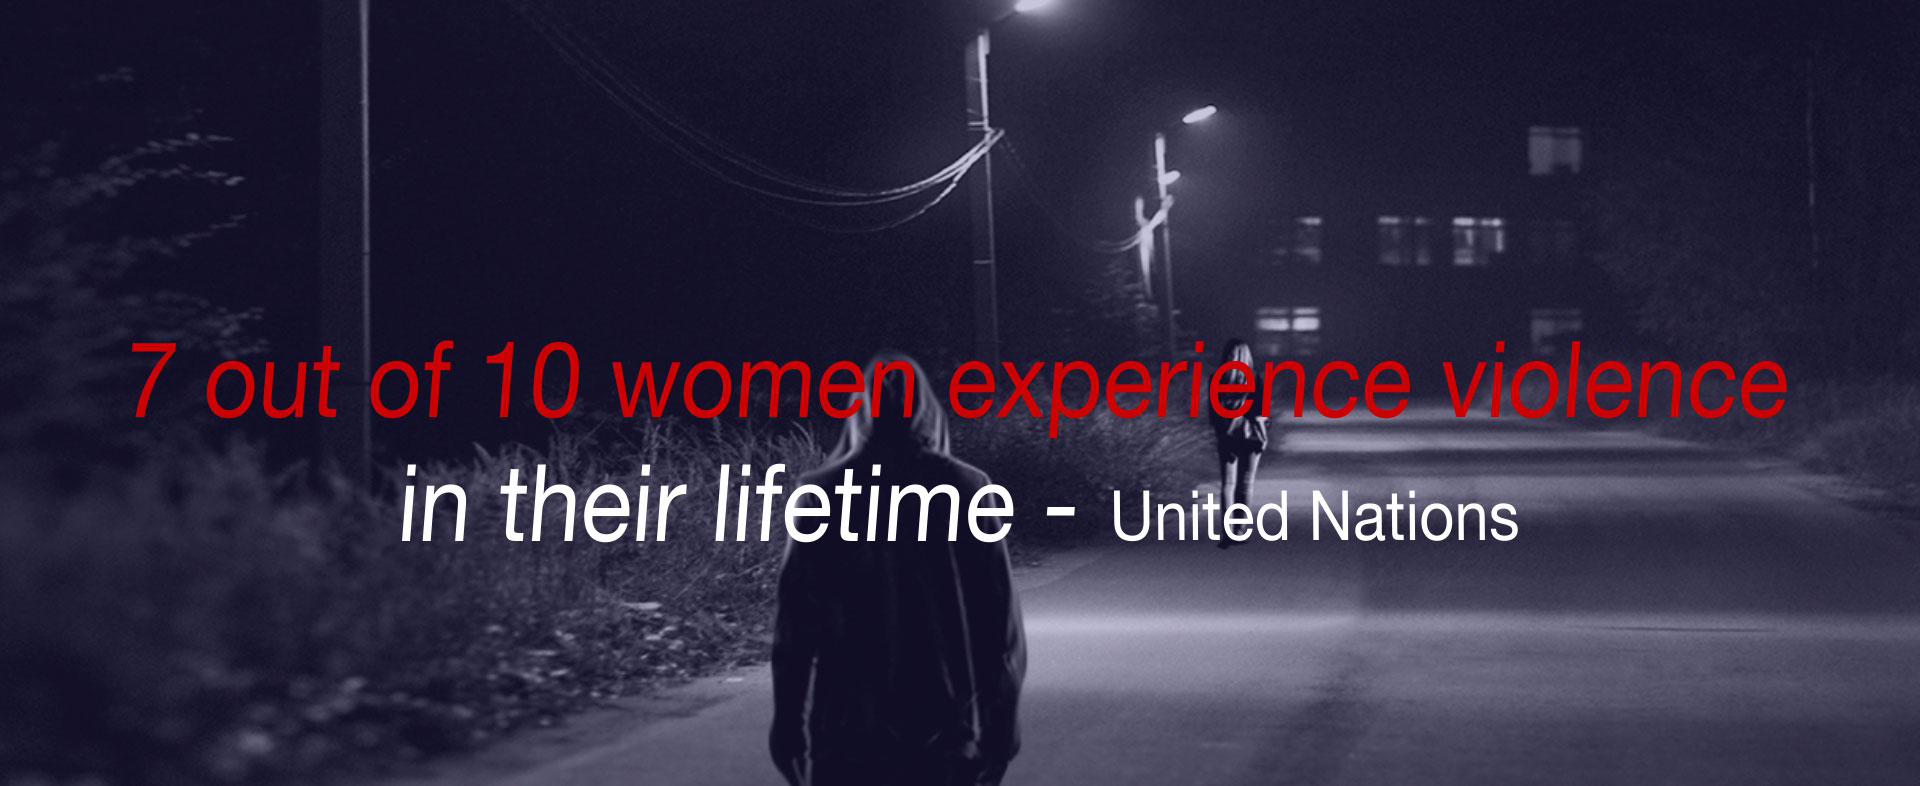 7 out of 10 women experience violence in their lifetime